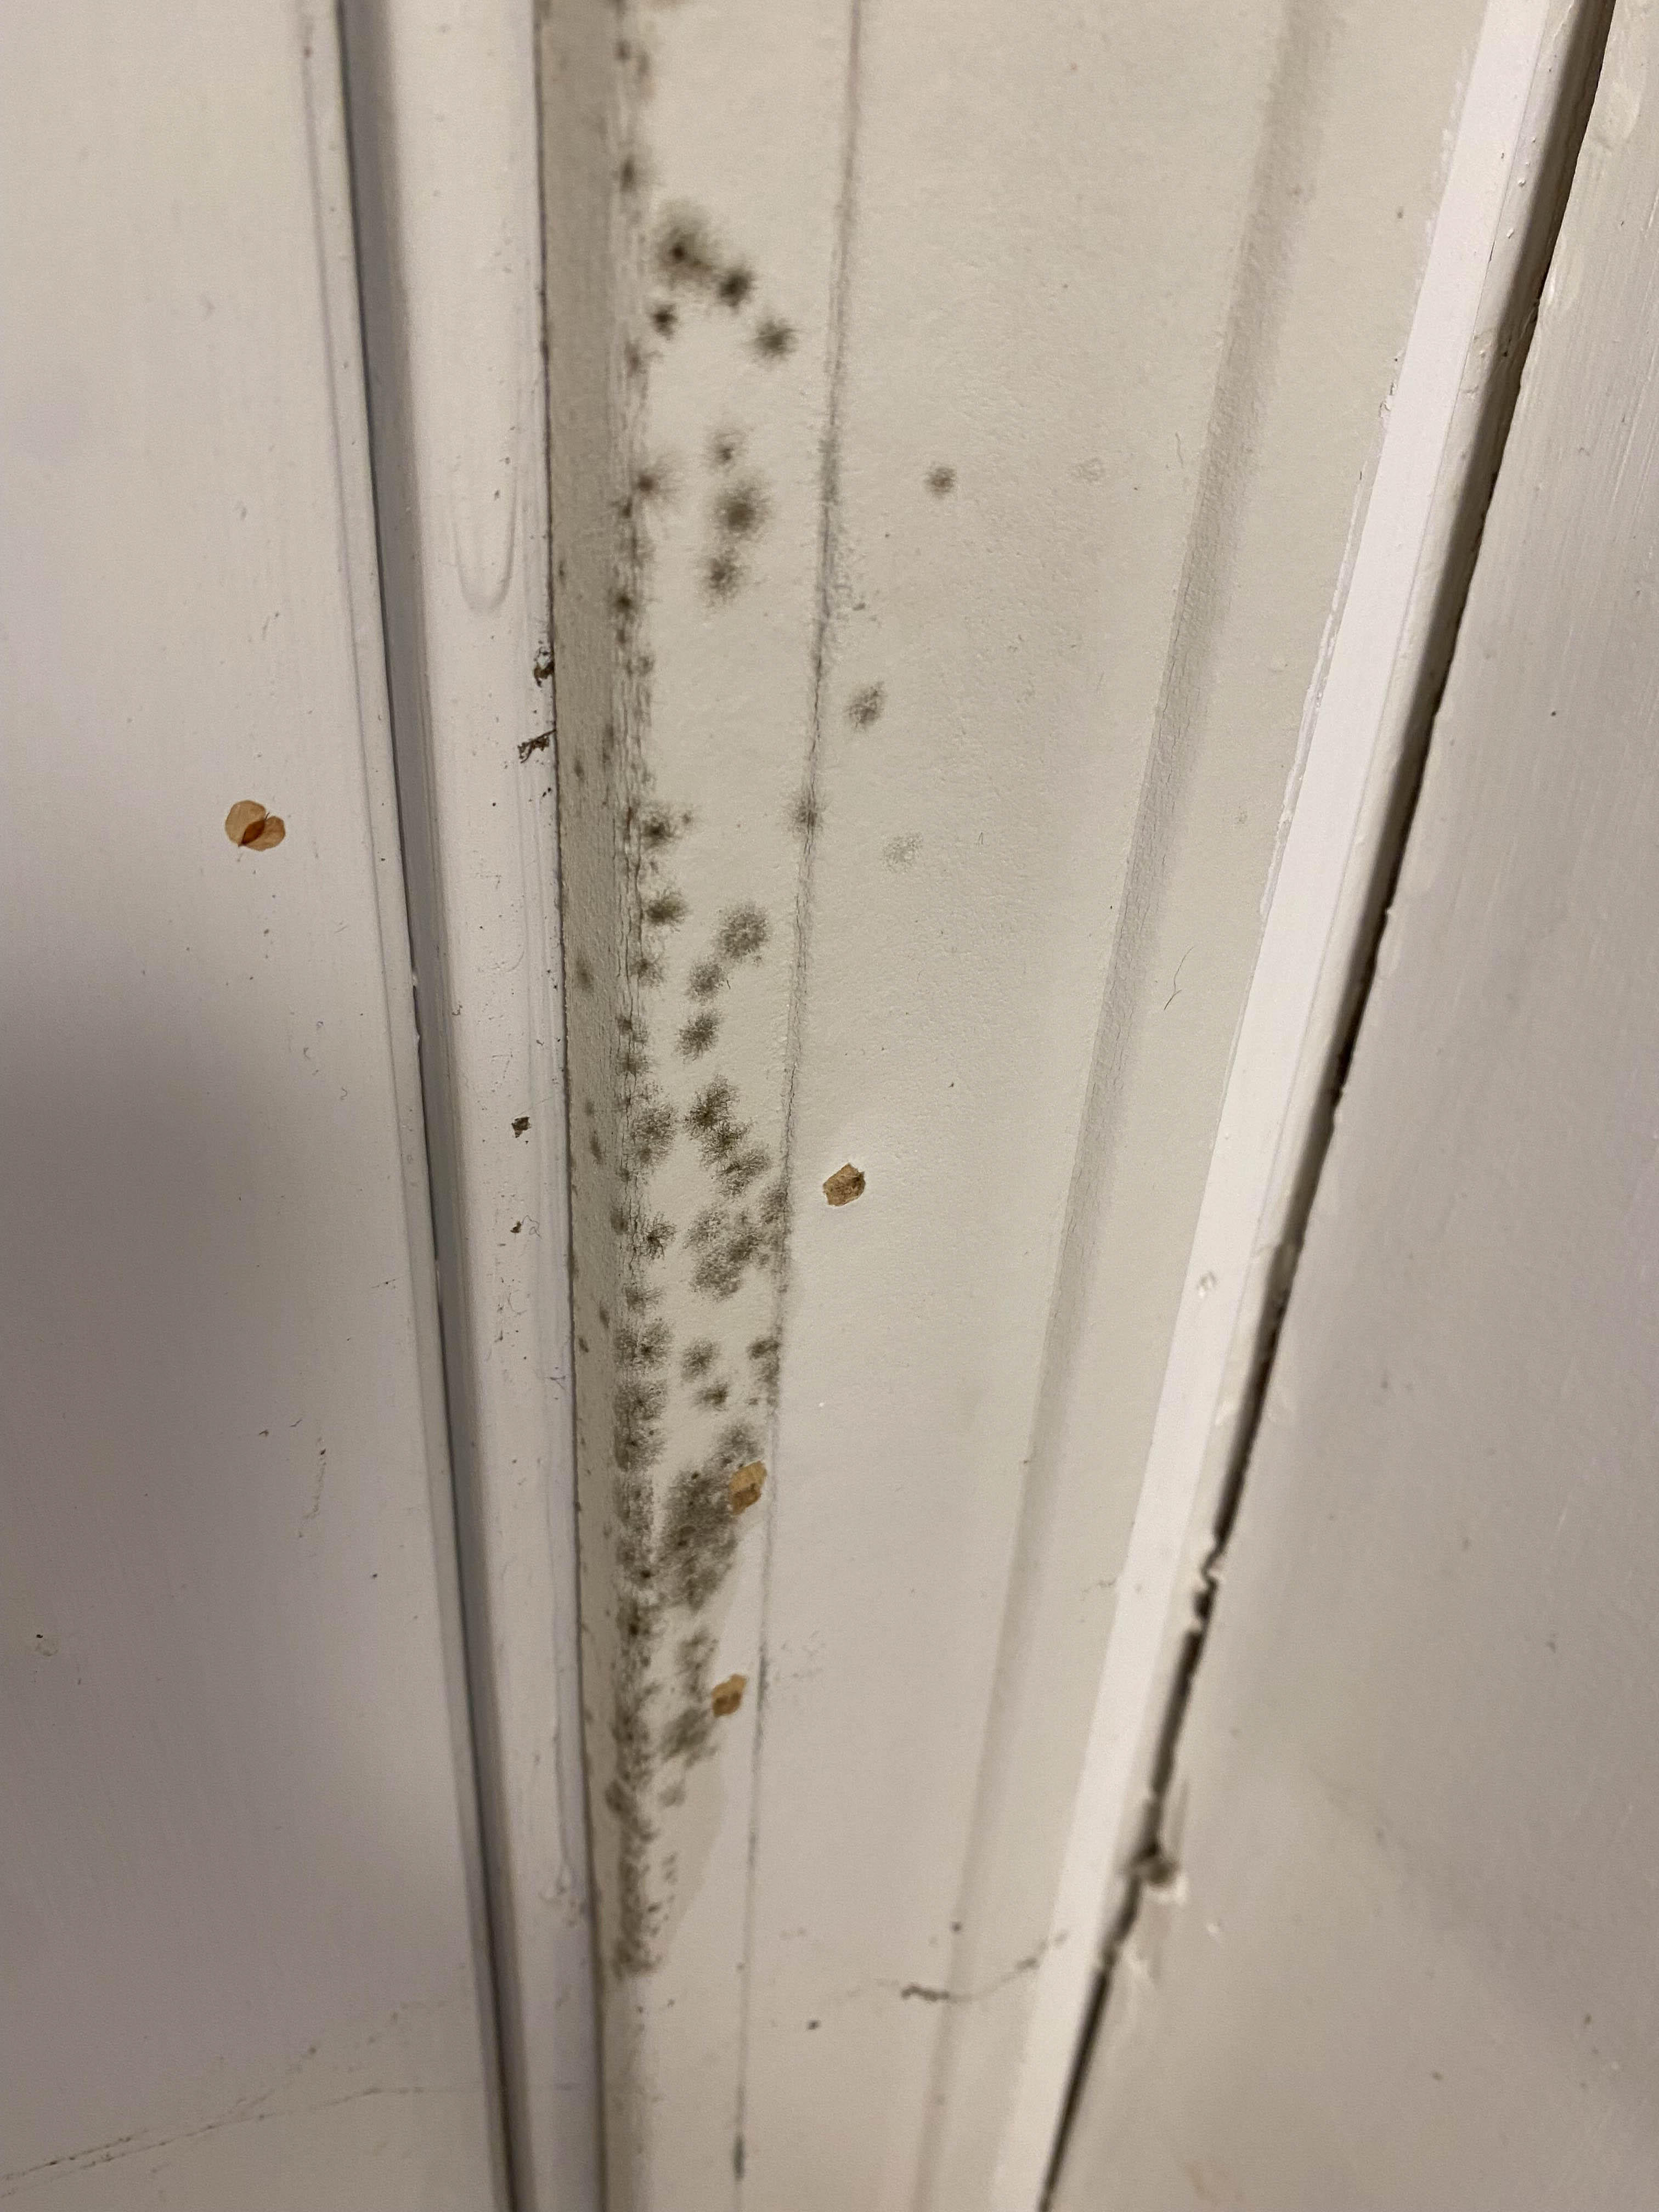 If there are unpleasant odors coming from your walls, floors, or drains, you might have a mold problem. You can depend on SERVPRO of Providence to handle all of your mold removal needs. If you have any questions or would like to schedule service, please give us a call!